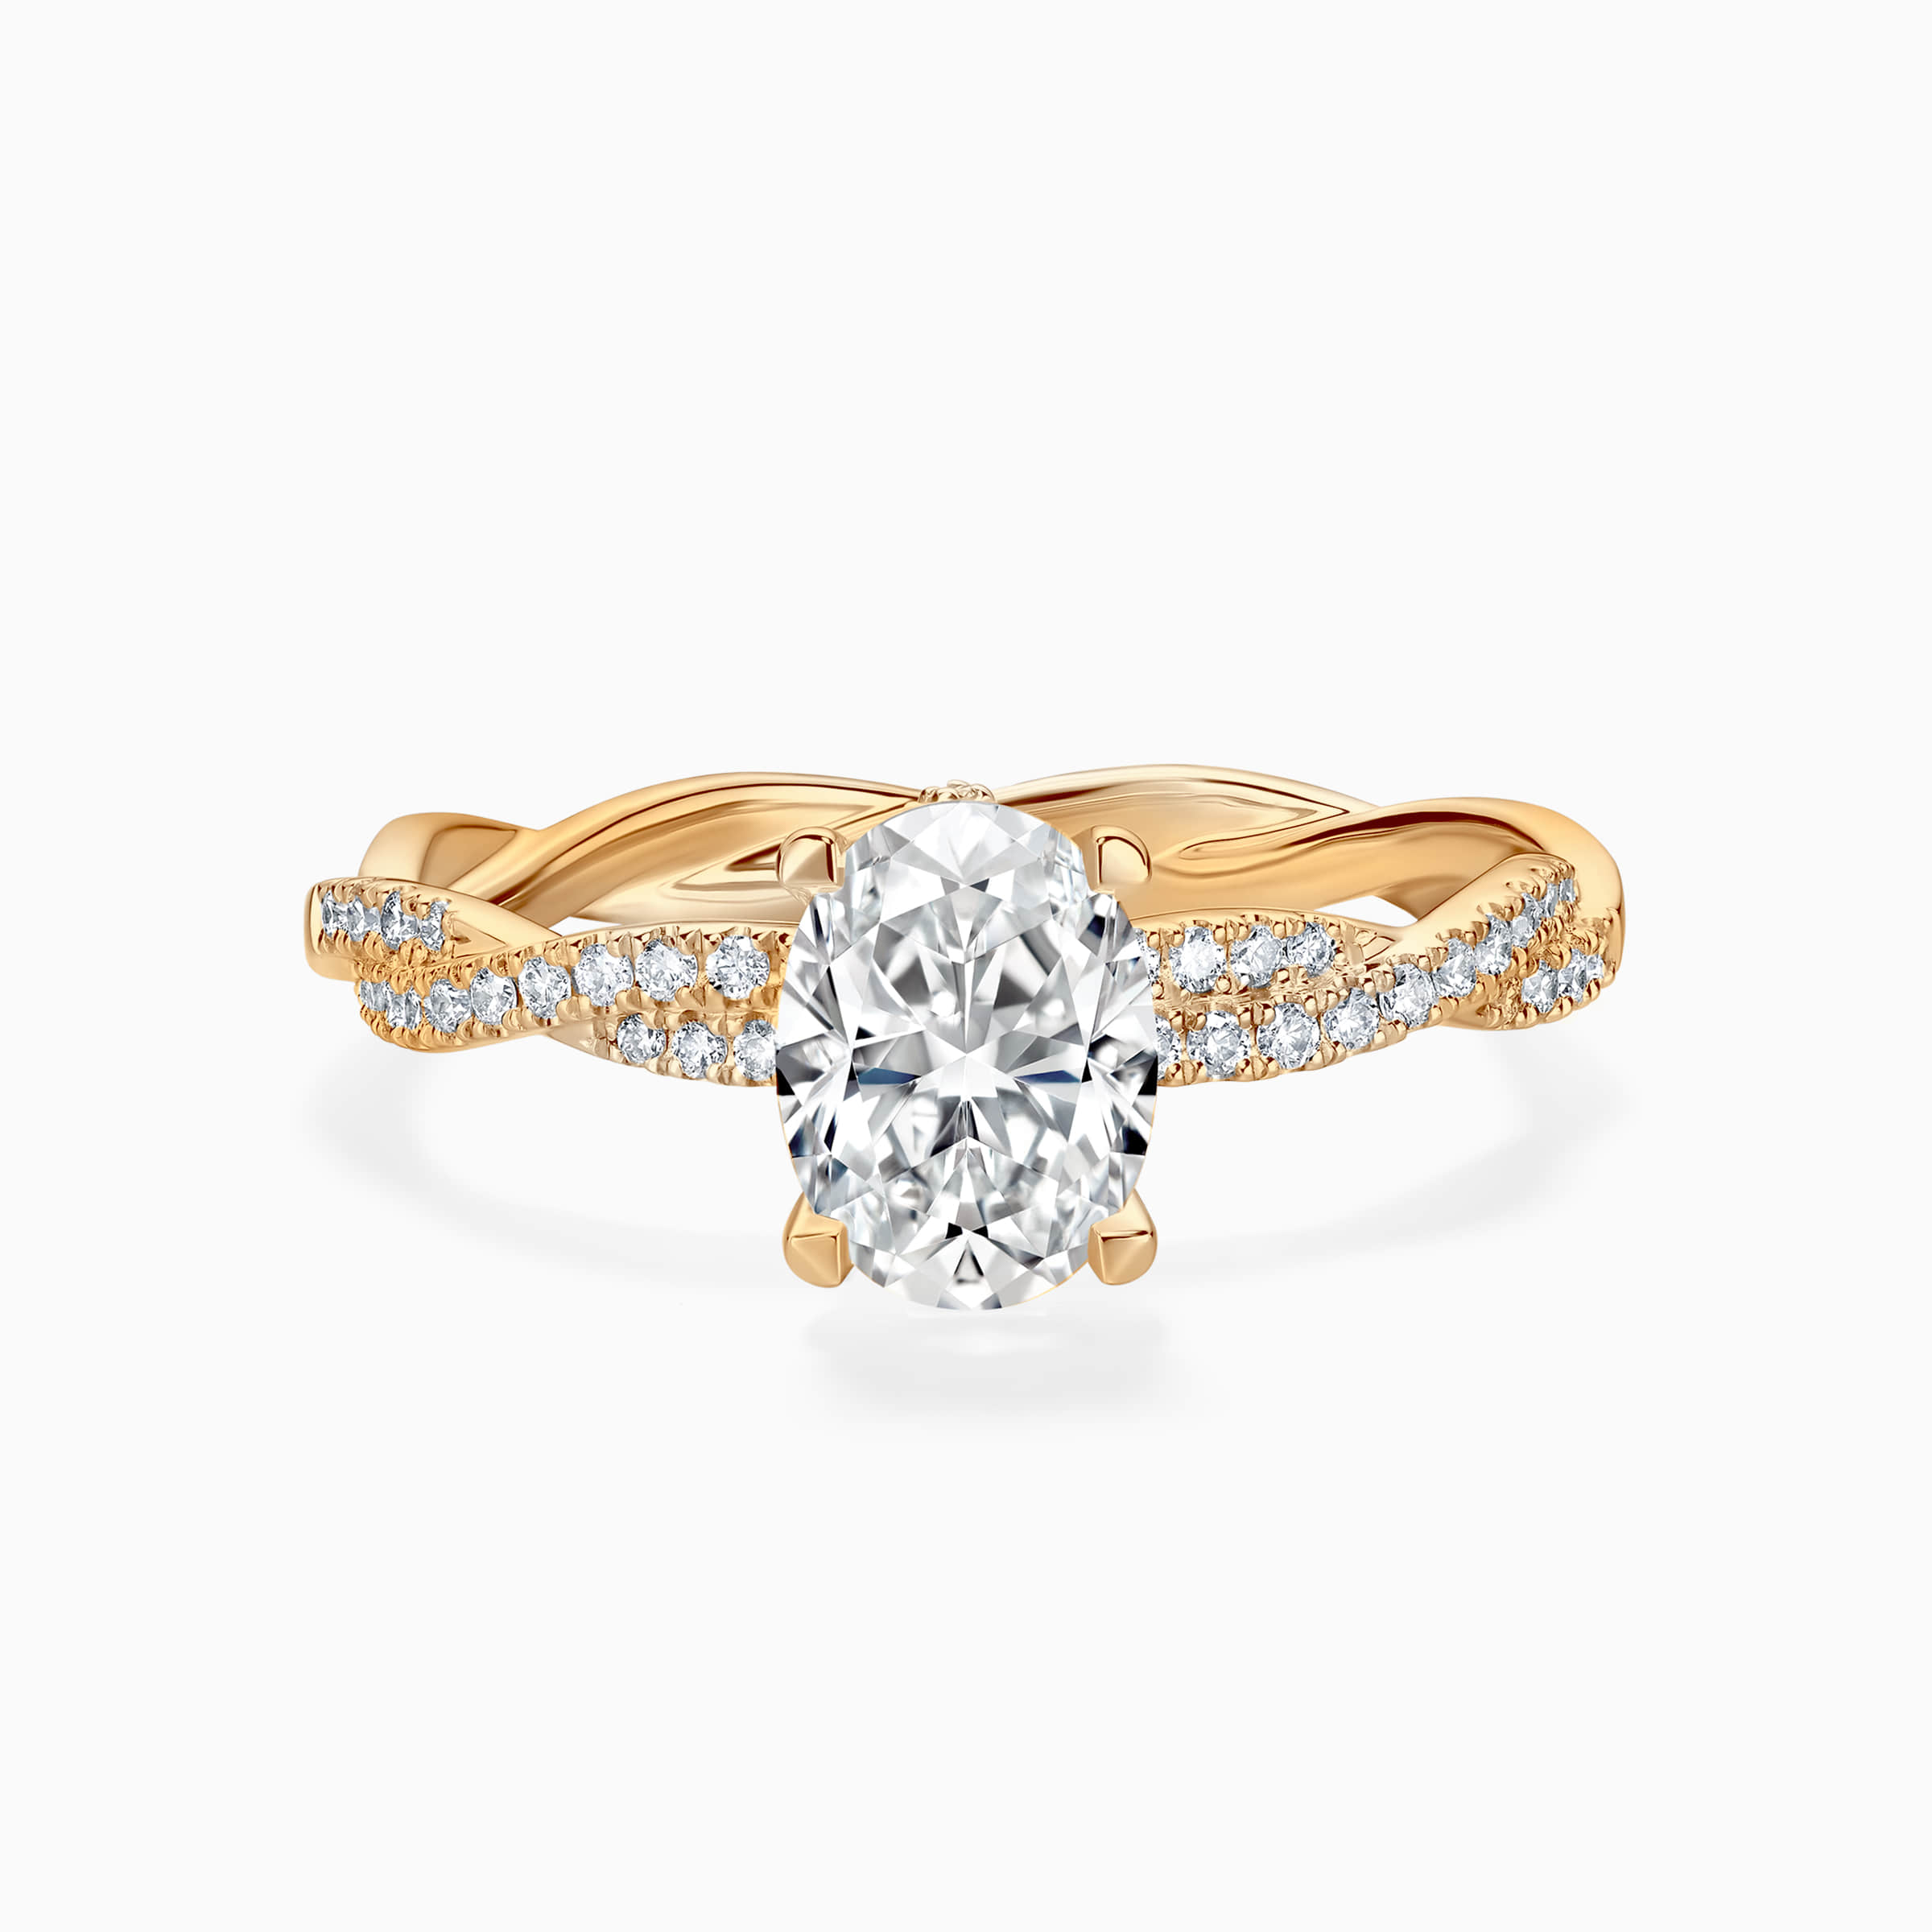 Darry Ring oval diamond engagement ring in yellow gold